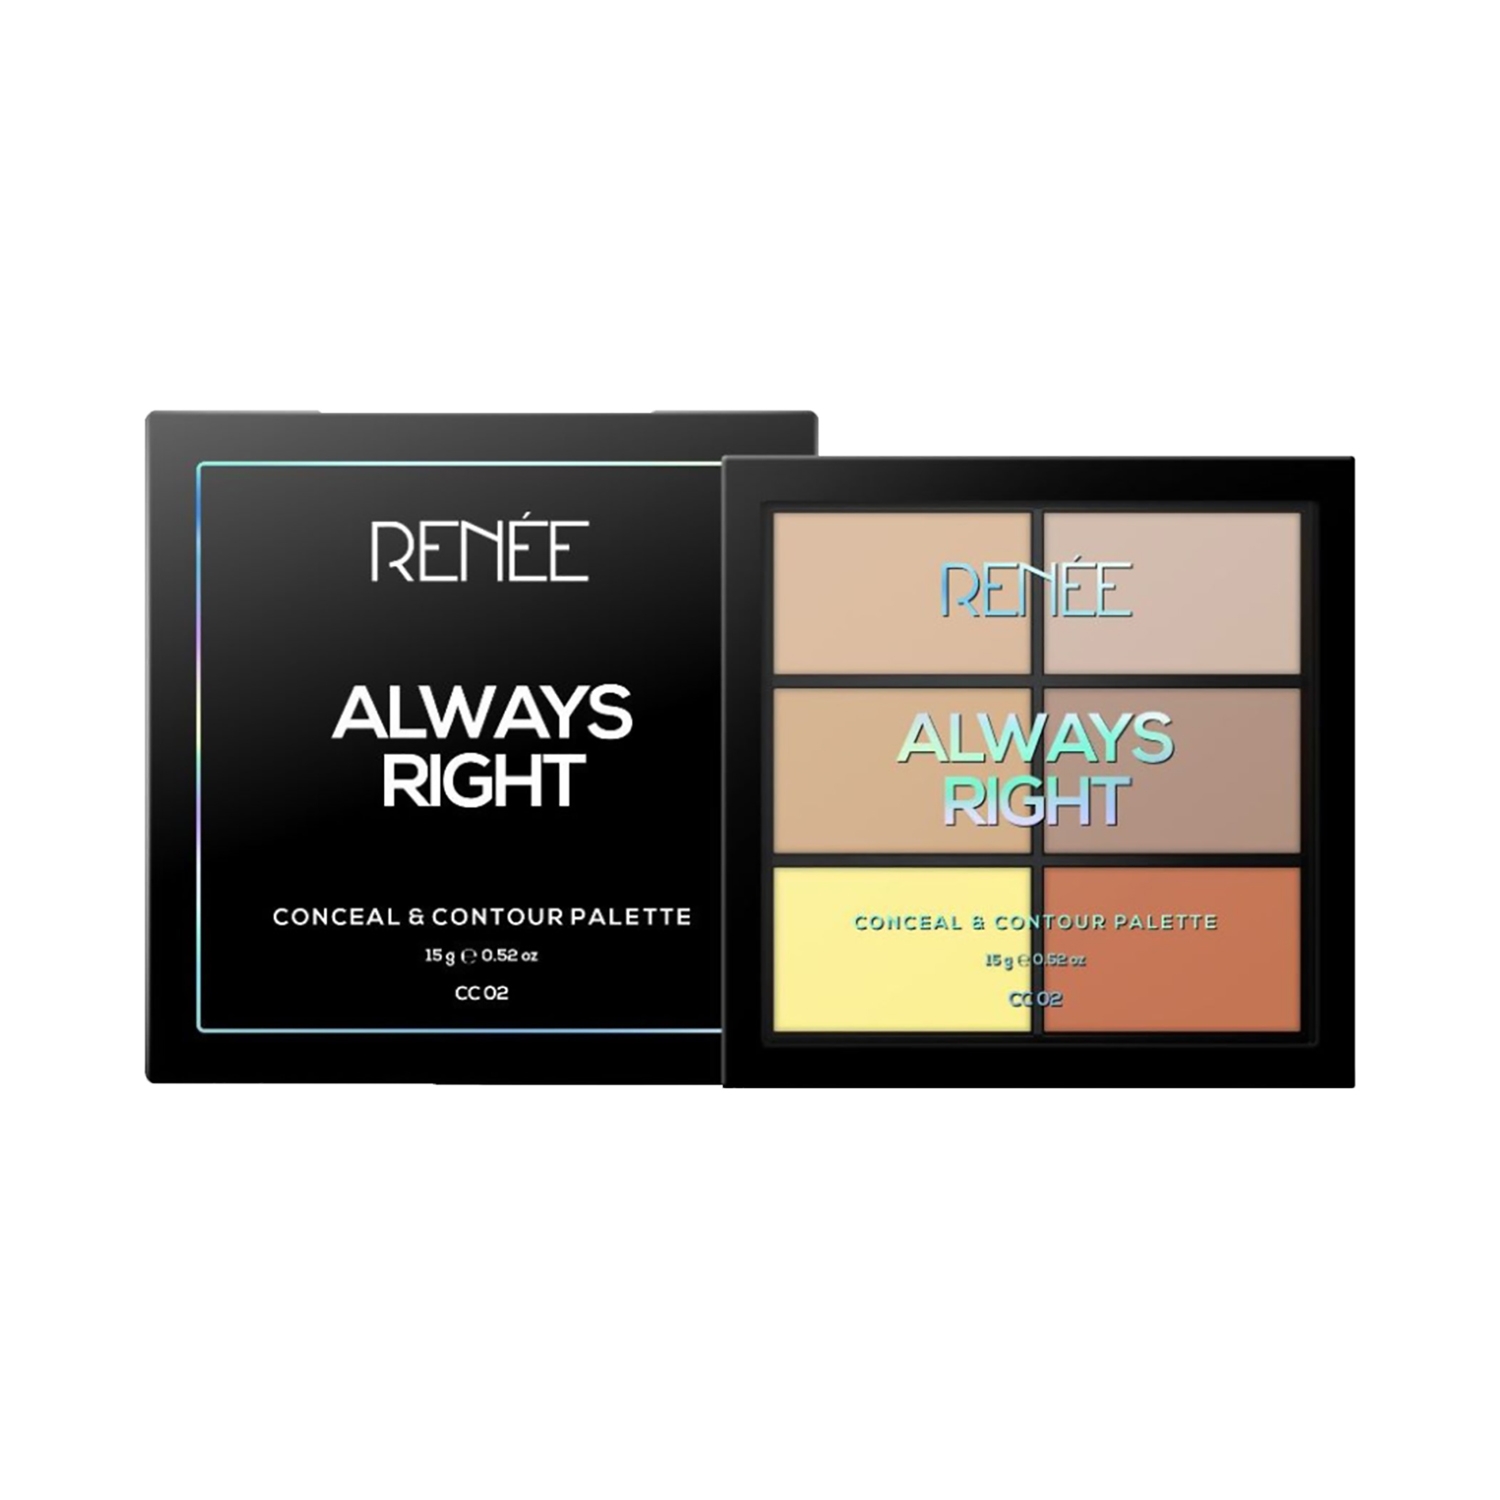 RENEE | RENEE Always Right Conceal & Contour Palette - CC02 (15g)